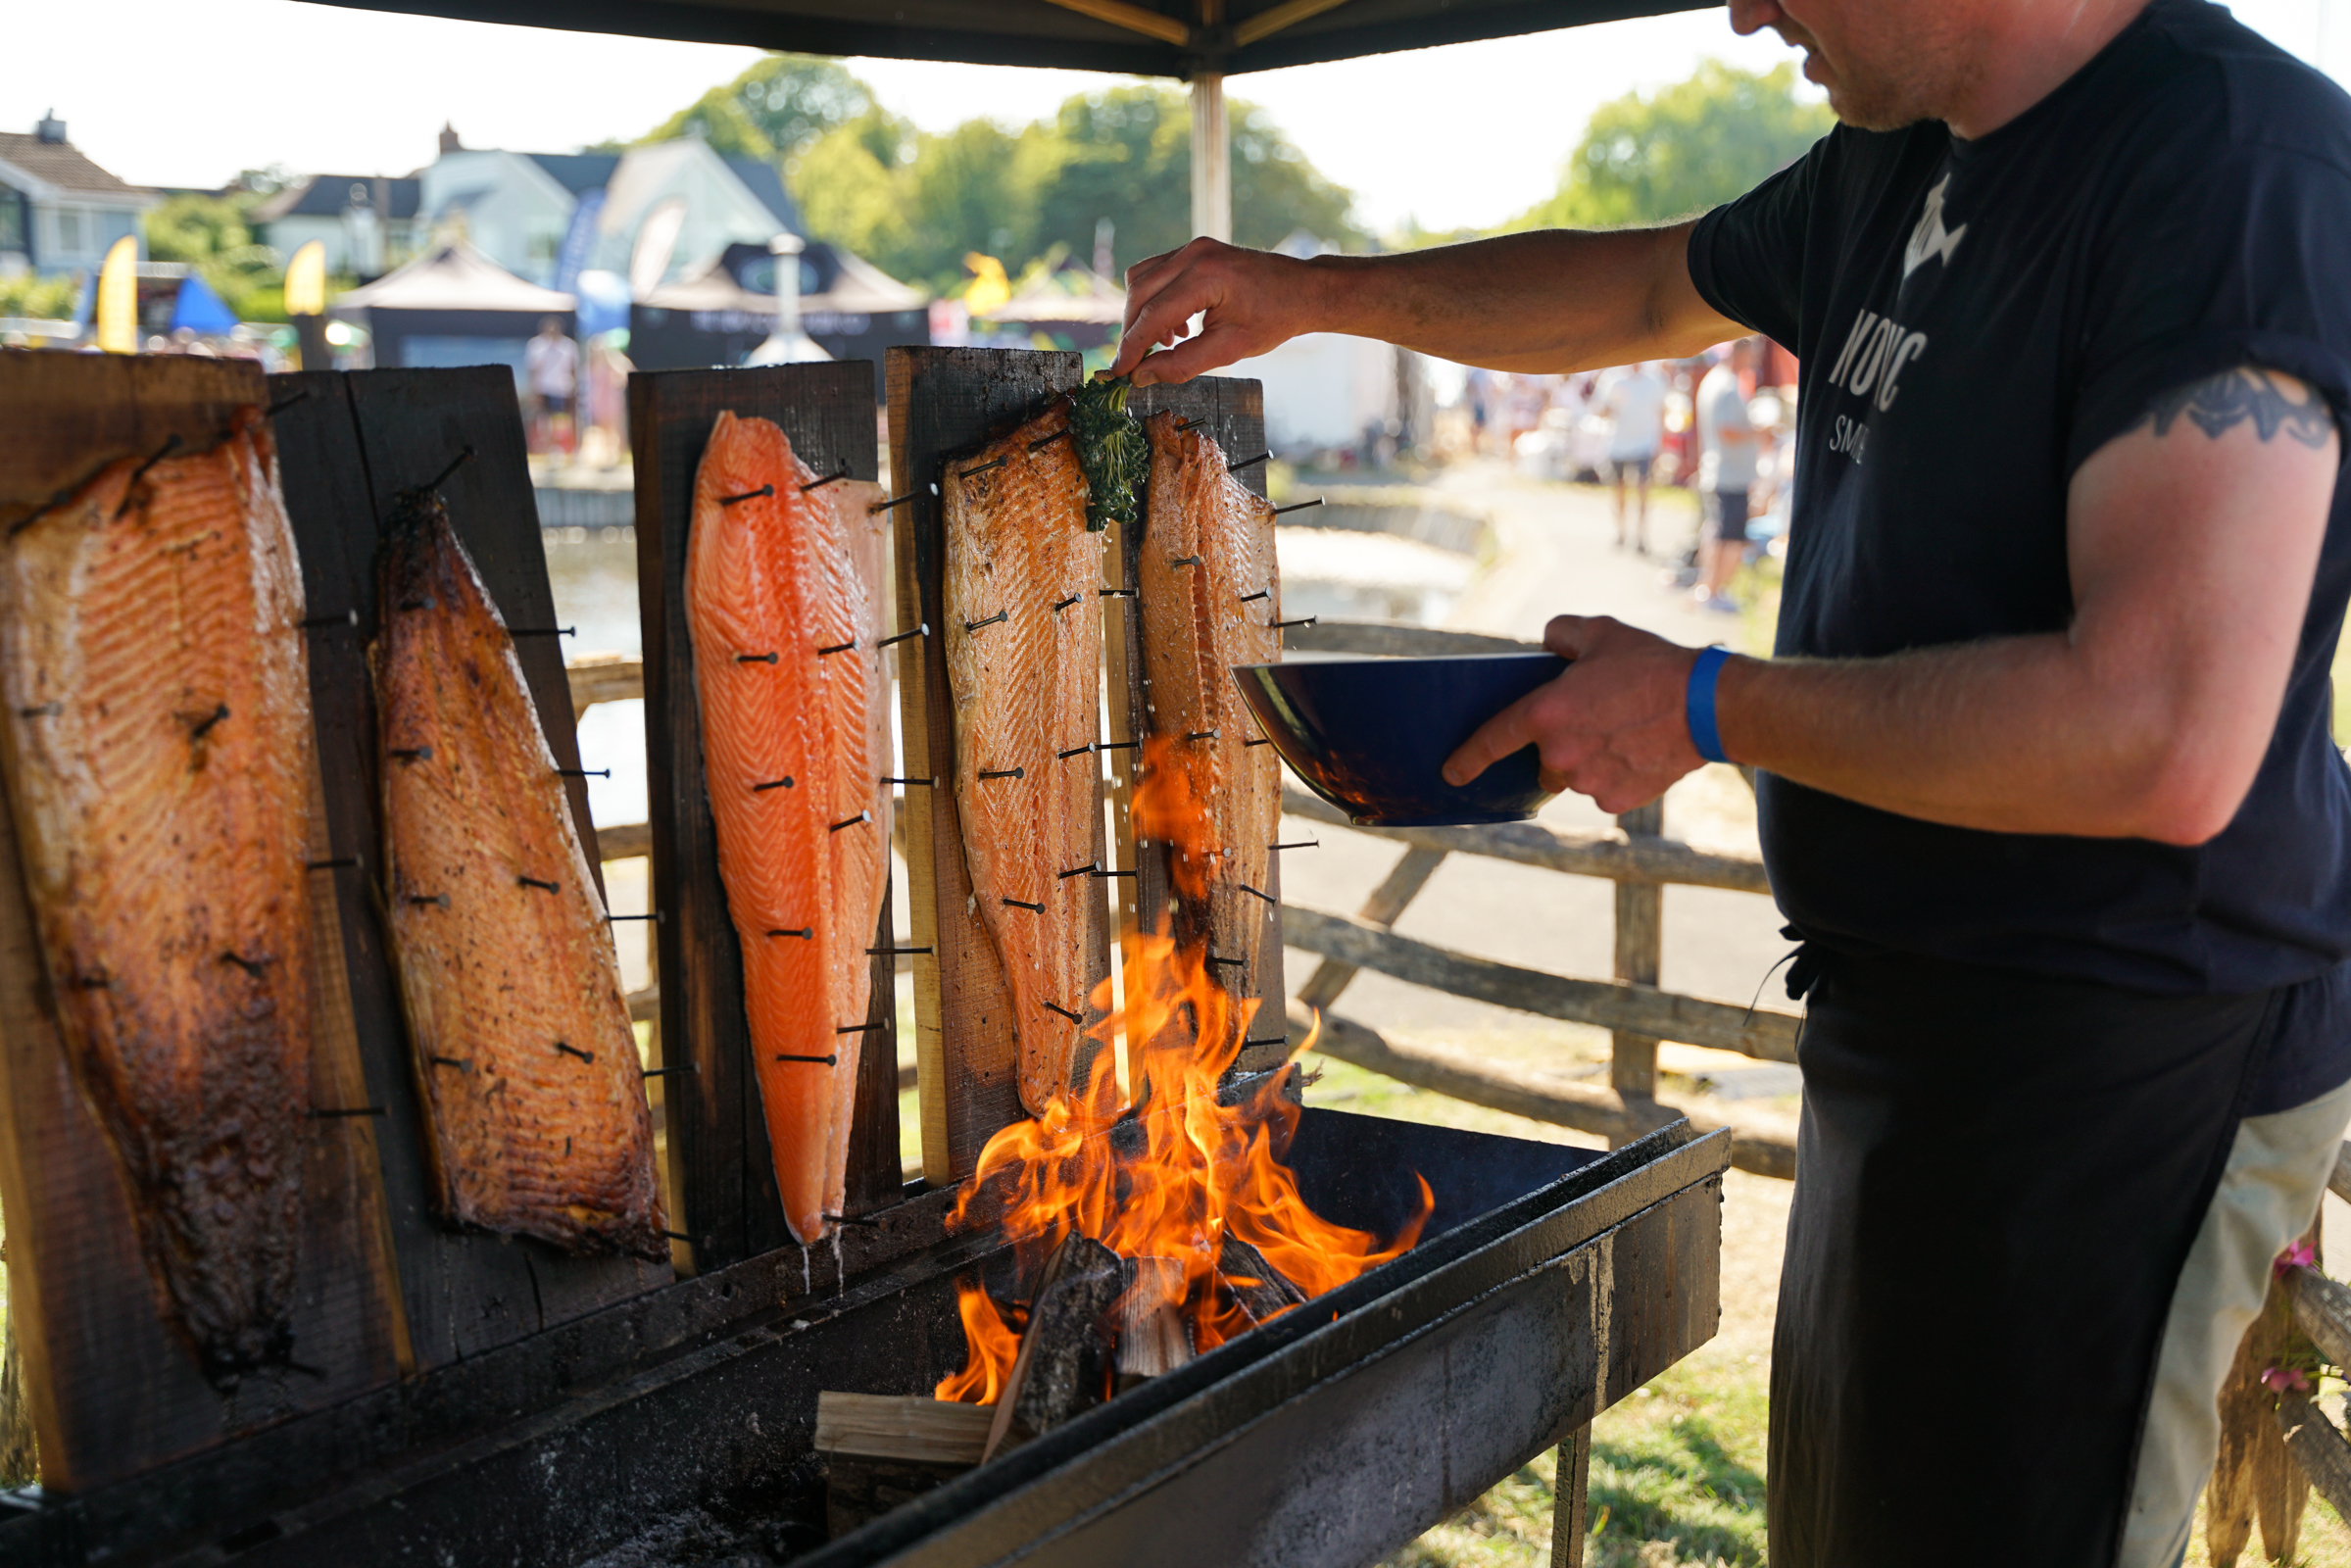 A person cooking fish over an open fire at a festival.